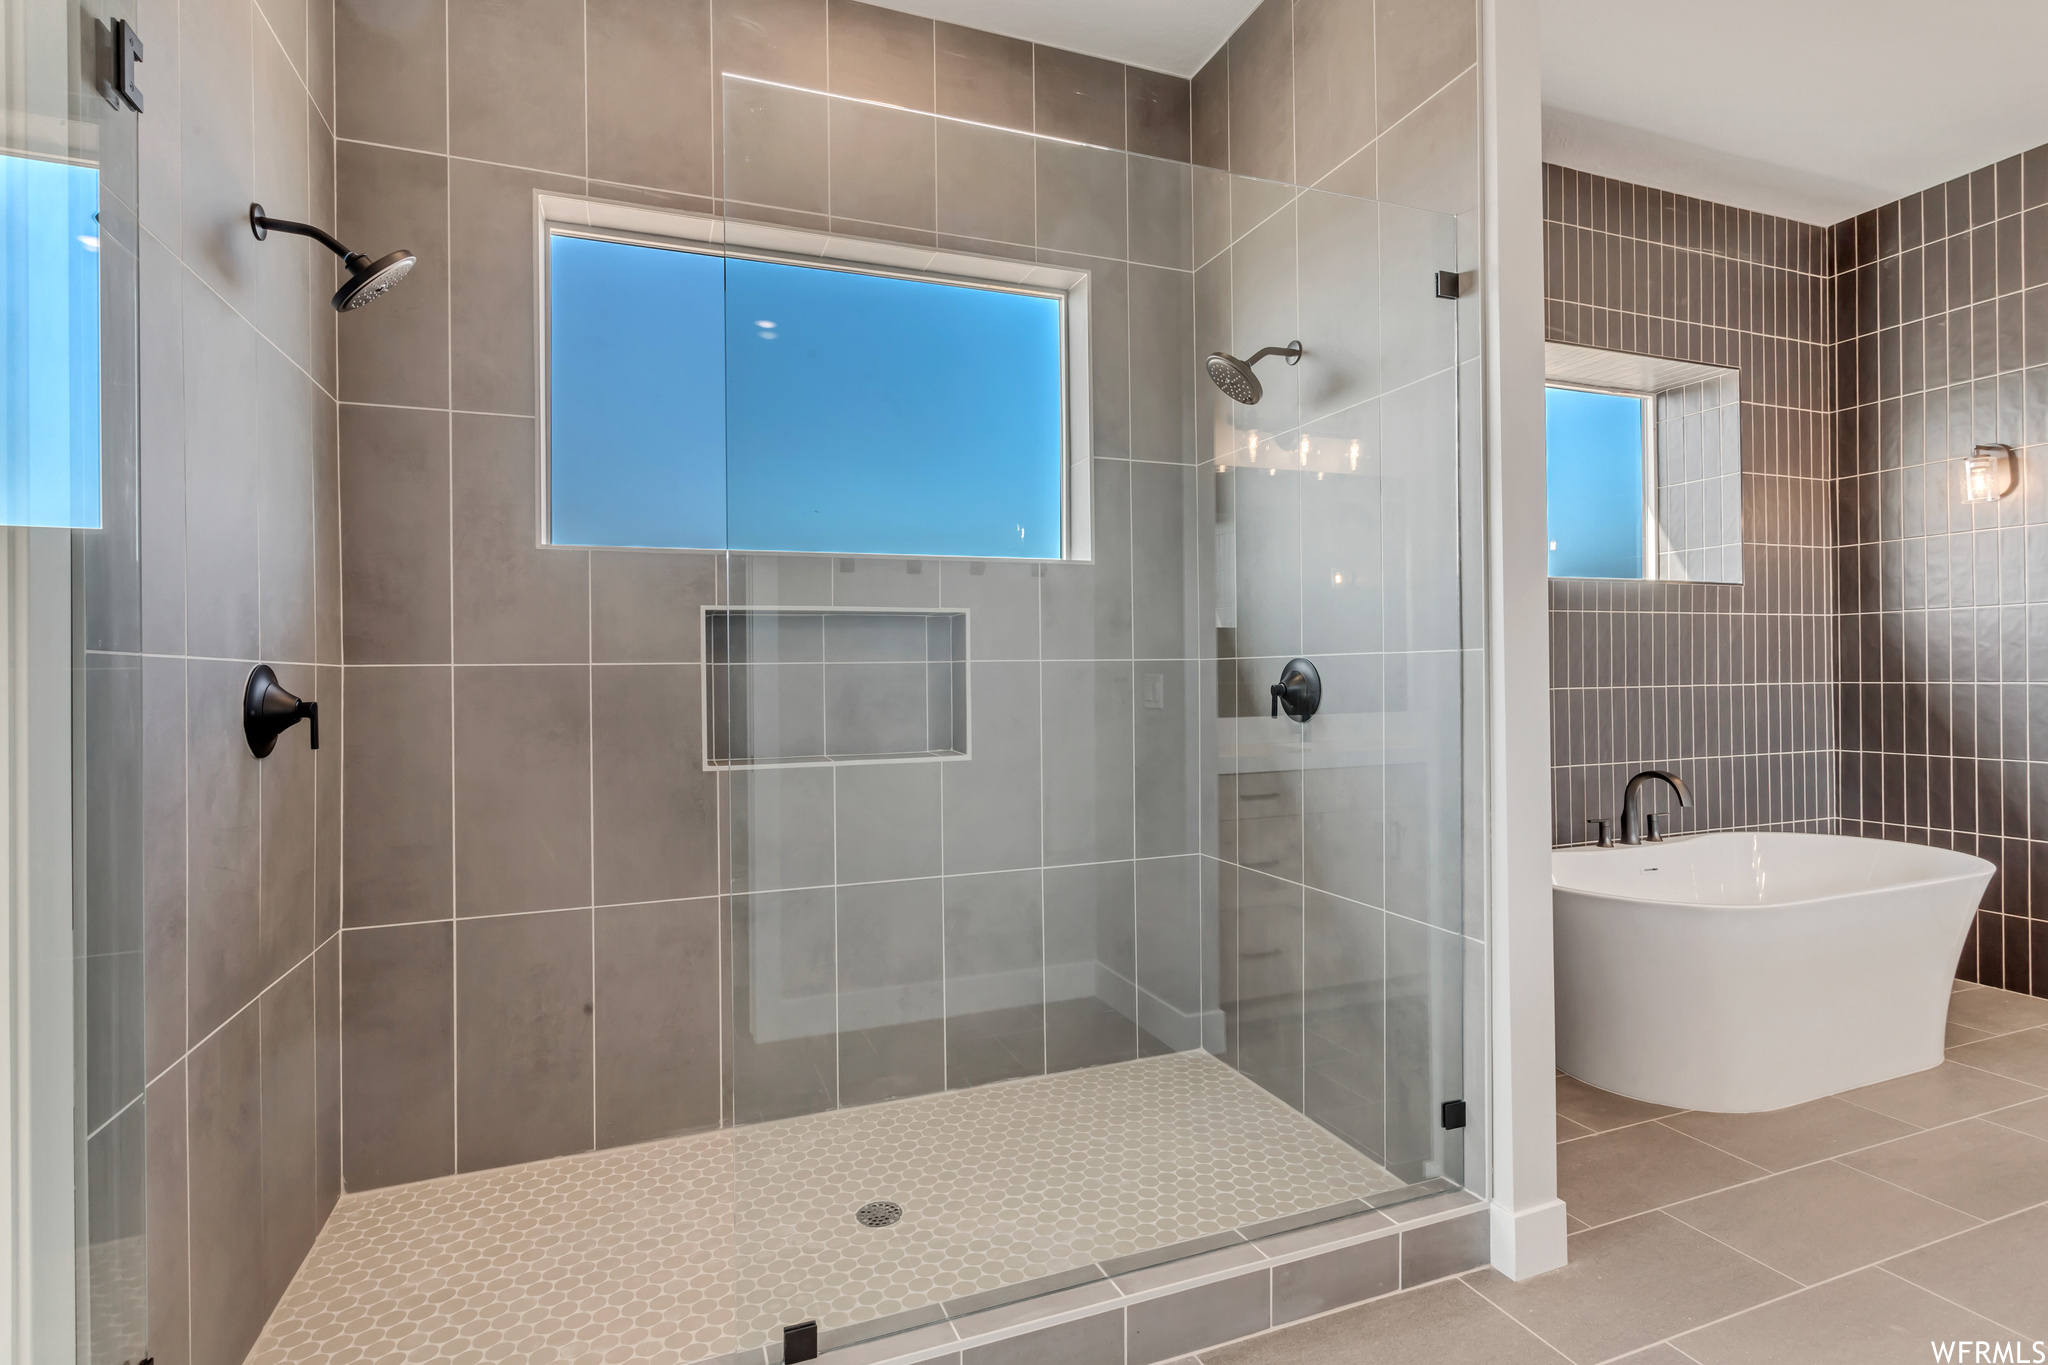 Primary bath showers include dual shower heads and a built in niche for bath products